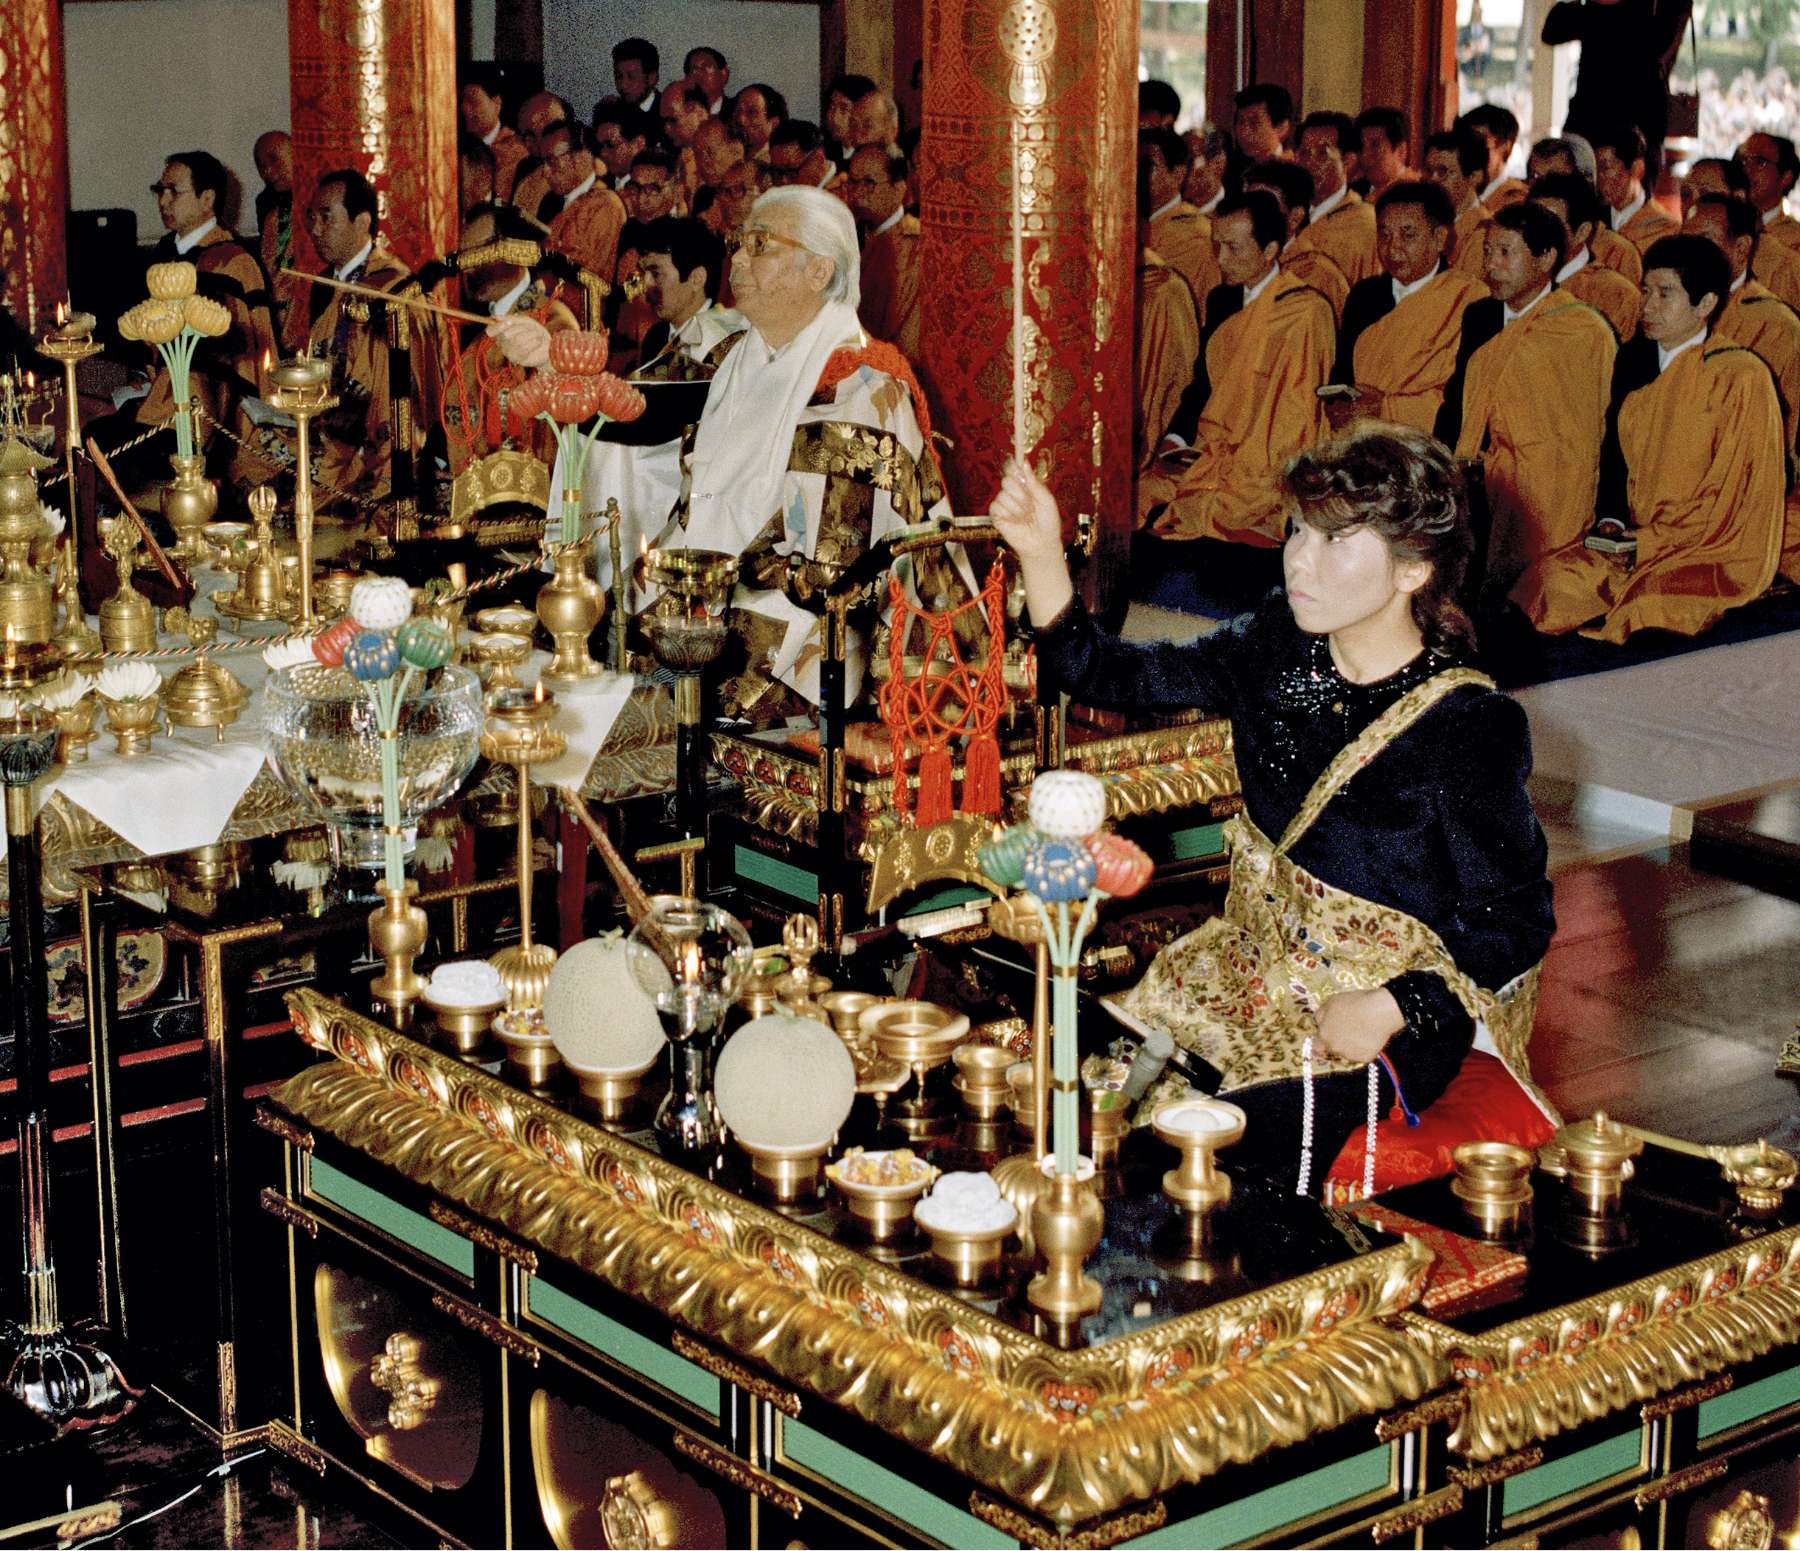 Shinjo, white haired, in brocade robes, and Masako, in formal dress, both seated before ornate tables filled with ritual materials, jointly conduct a rite in a temple filled with monks in formal robes.